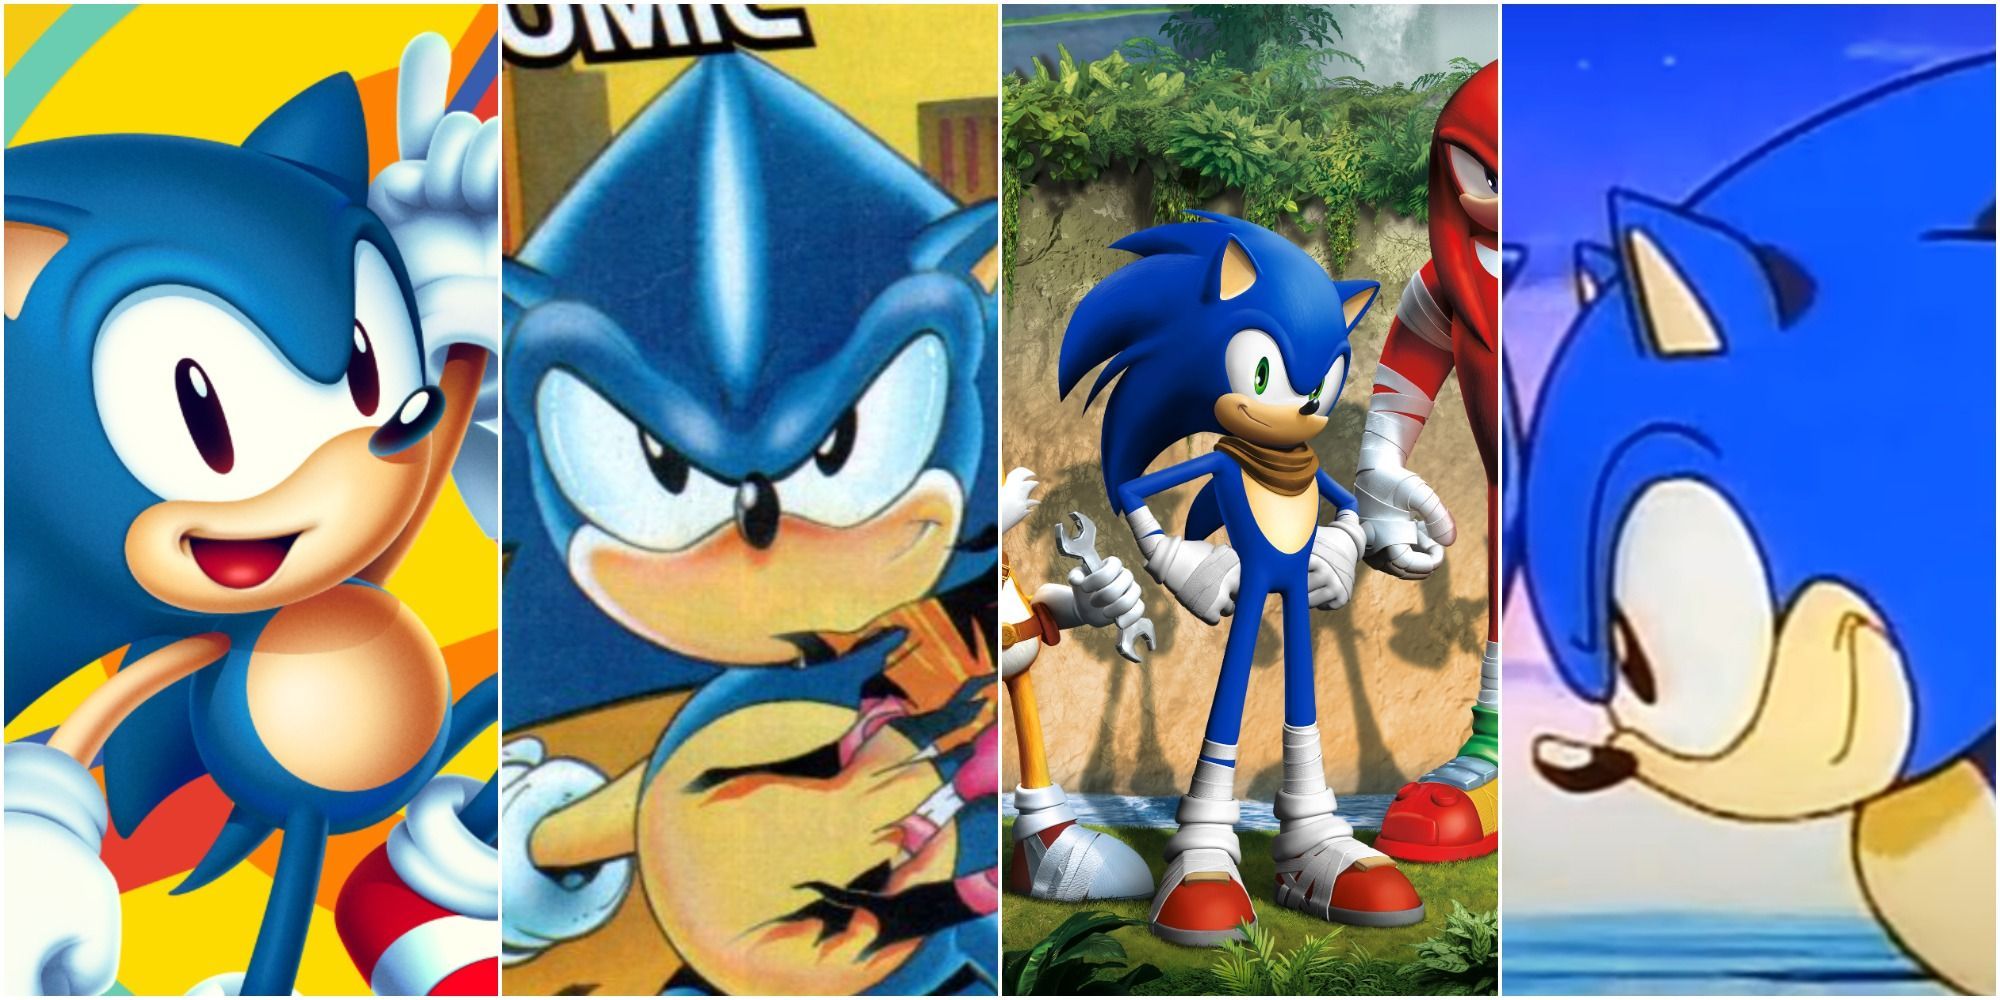 Every Different Version Of Sonic The Hedgehog Including Movies And Comics,  Ranked